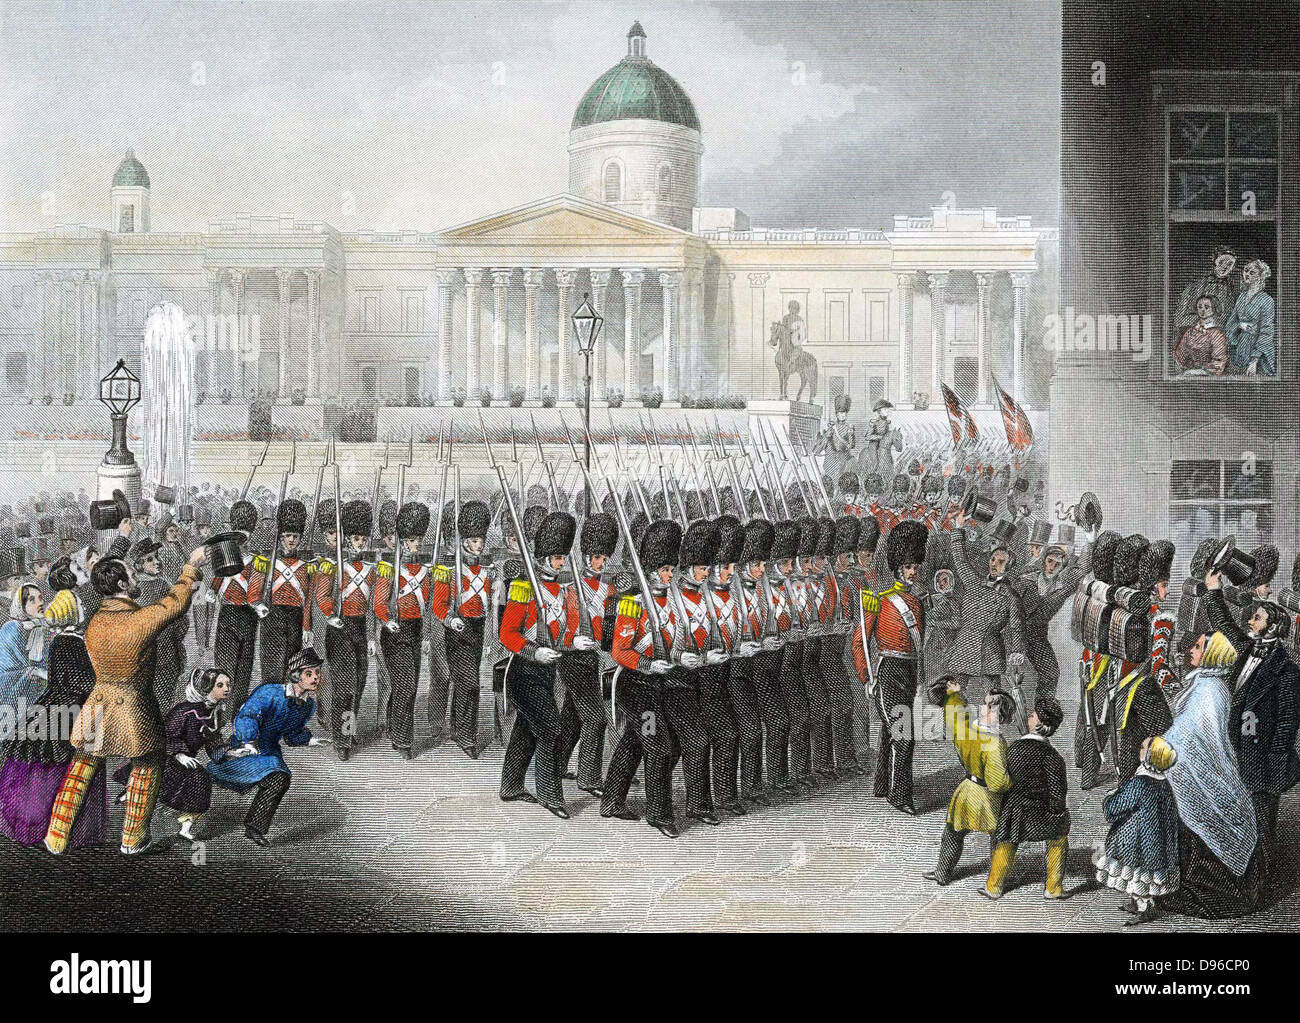 Crimean War (Russo-Turkish War) 1853-1856:  British Grenadier Guards departing from Trafalgar Square, London, 22 February 1854 on route for the Crimea. Hand-coloured engraving c1860. Stock Photo